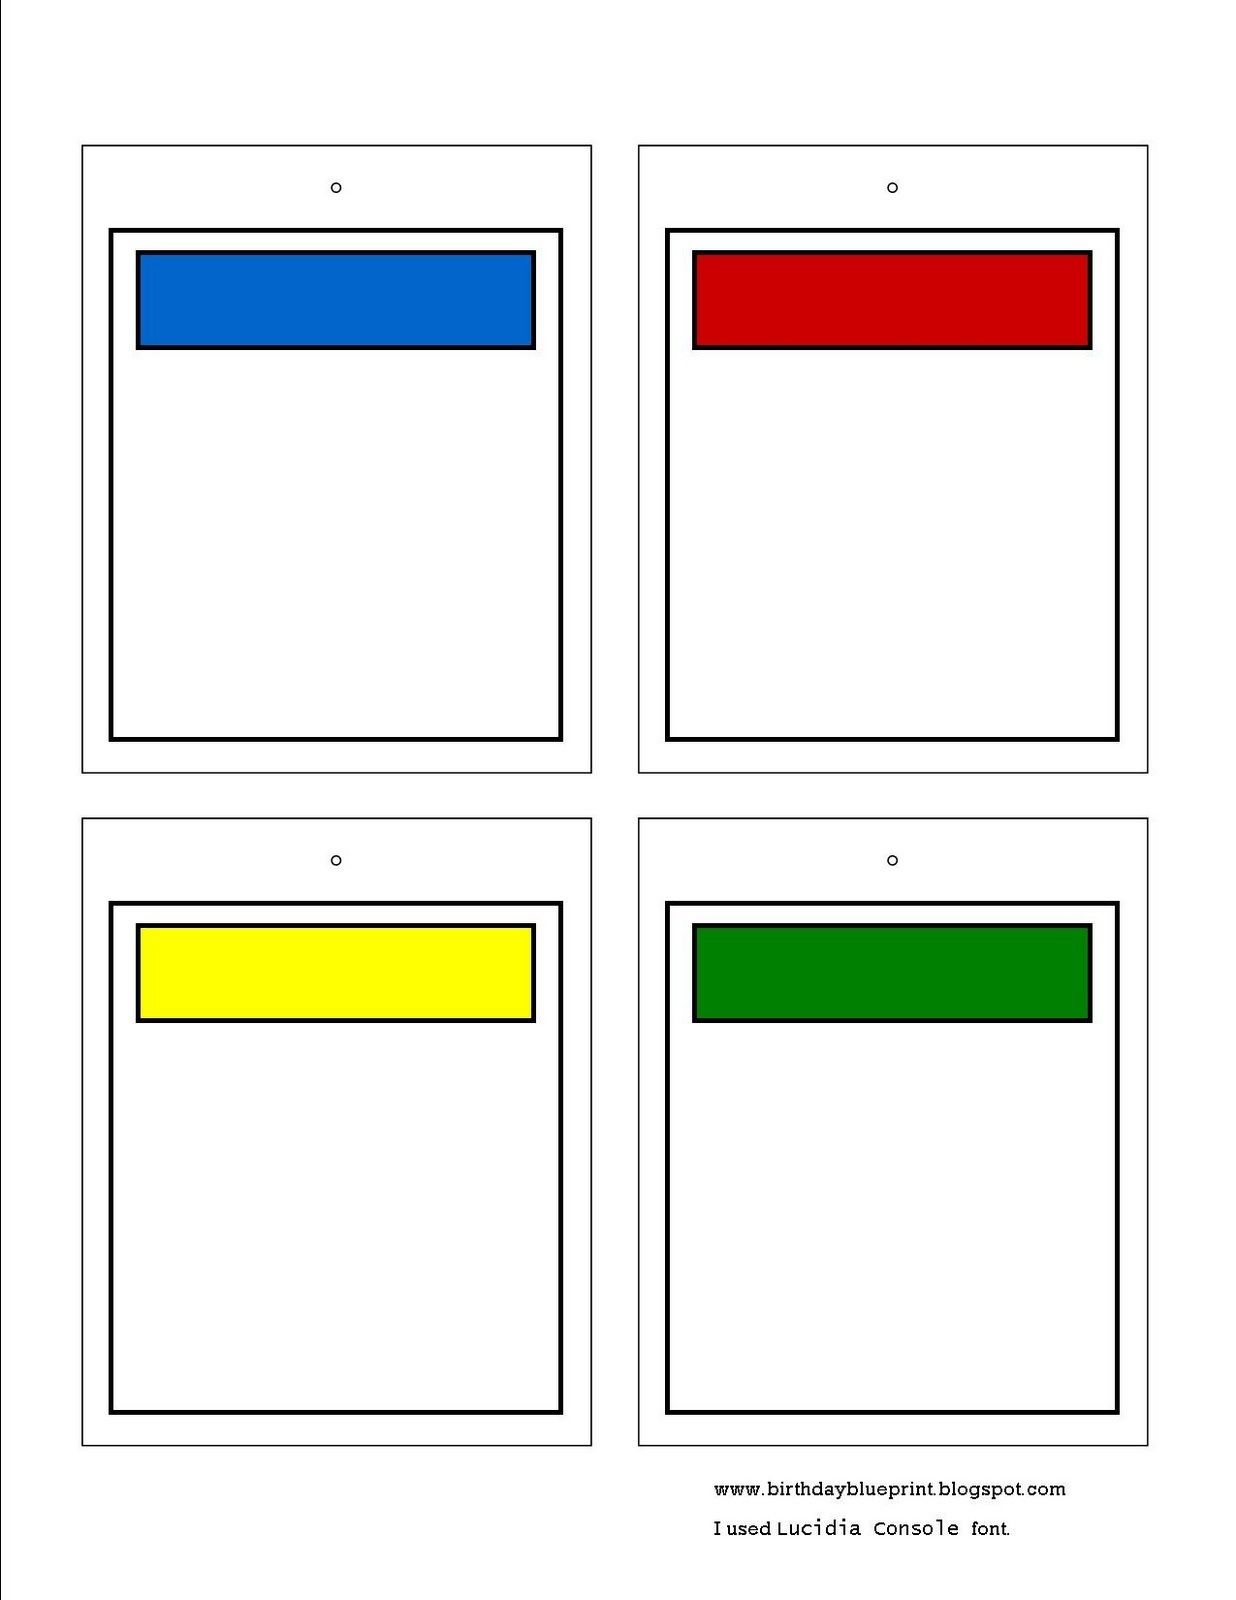 Blank Monopoly Property Cards. To Write In The Bible Memory Pertaining To Monopoly Property Cards Template